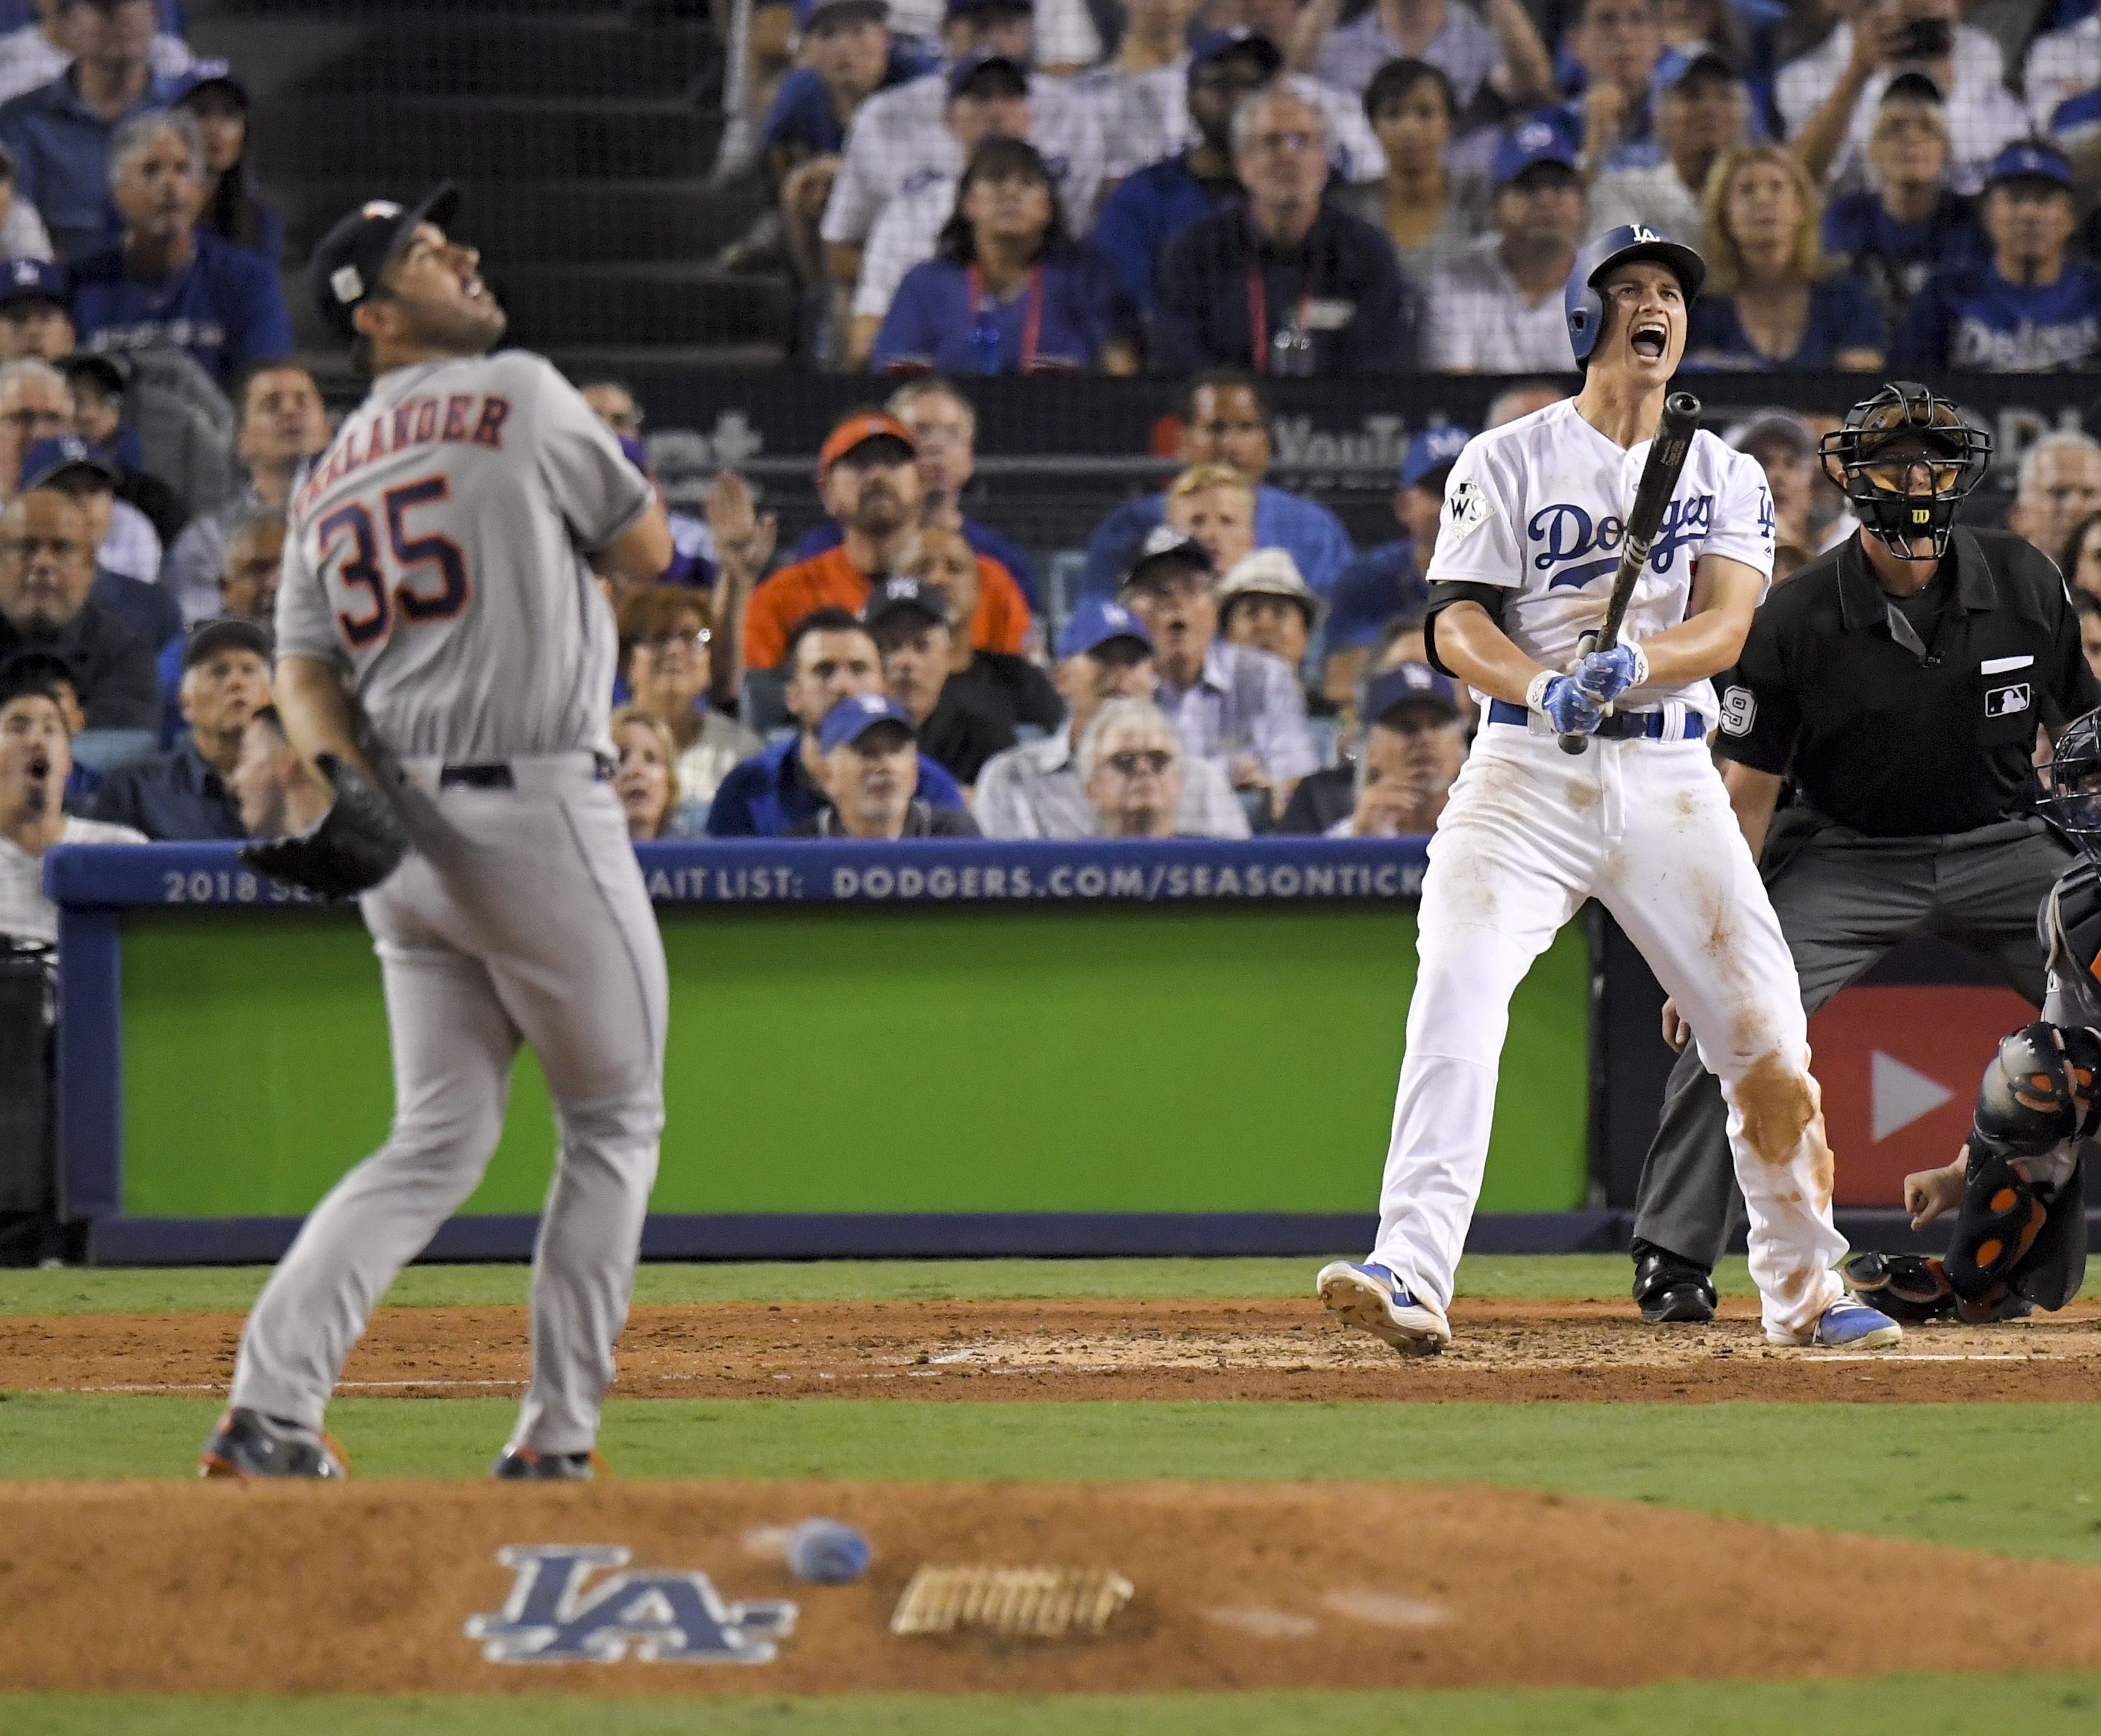 Corey Seager's World Series home run had everyone excited in Game 2